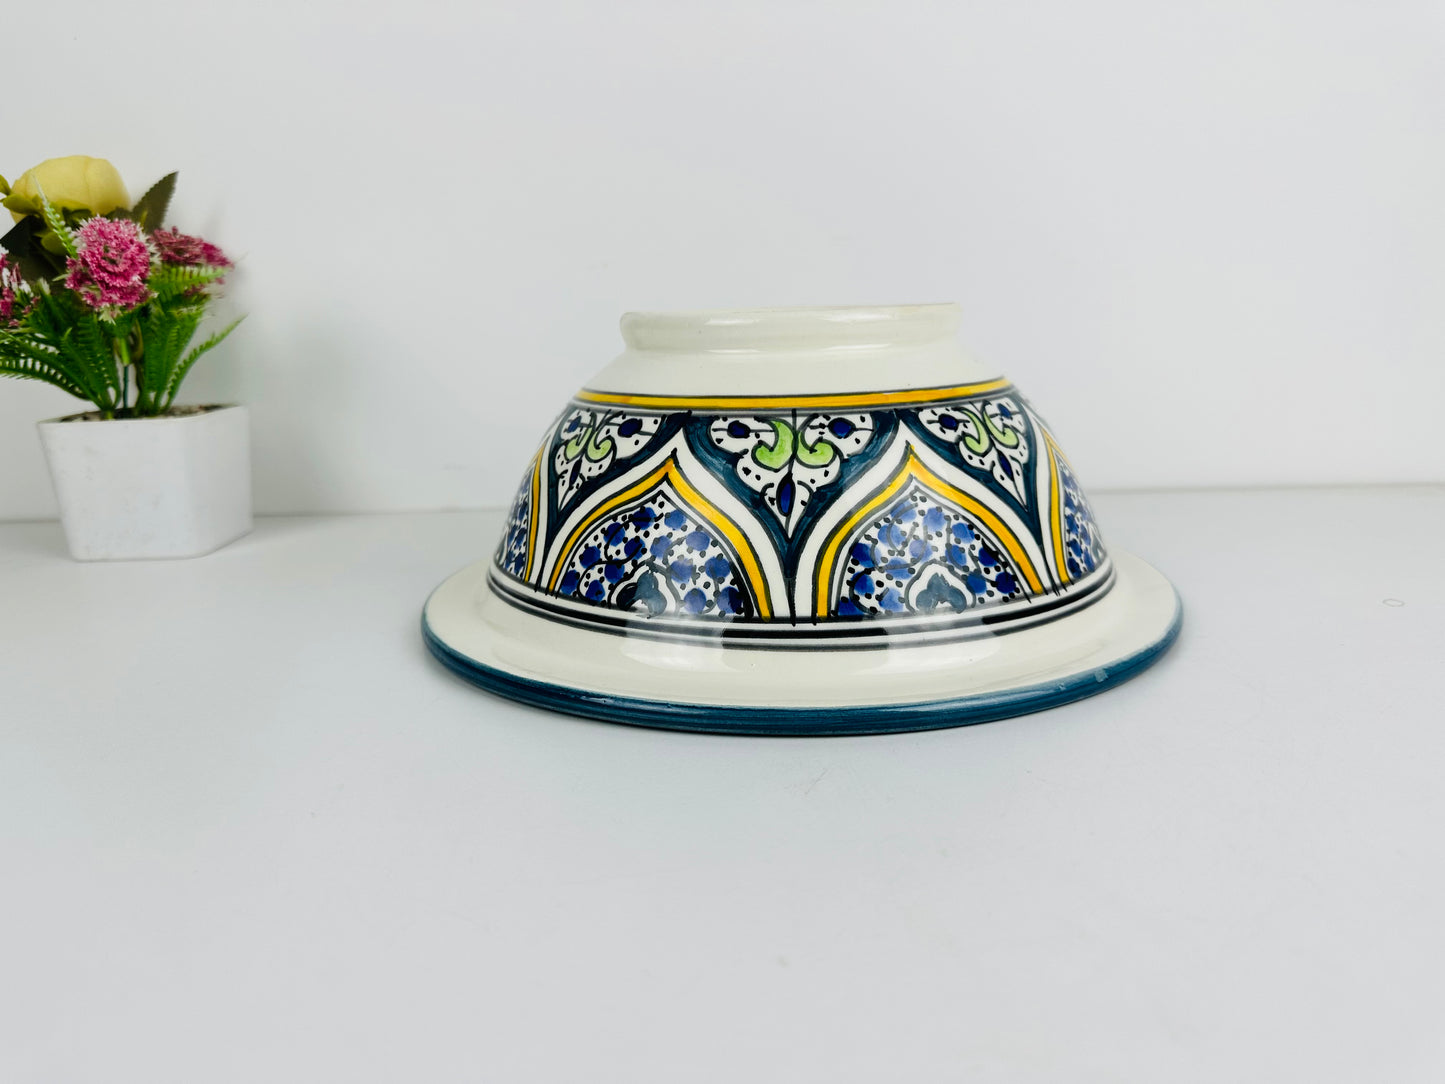 Moroccan Mirage: Handcrafted Ceramic Sink with Vibrant Moroccan-Inspired Colors